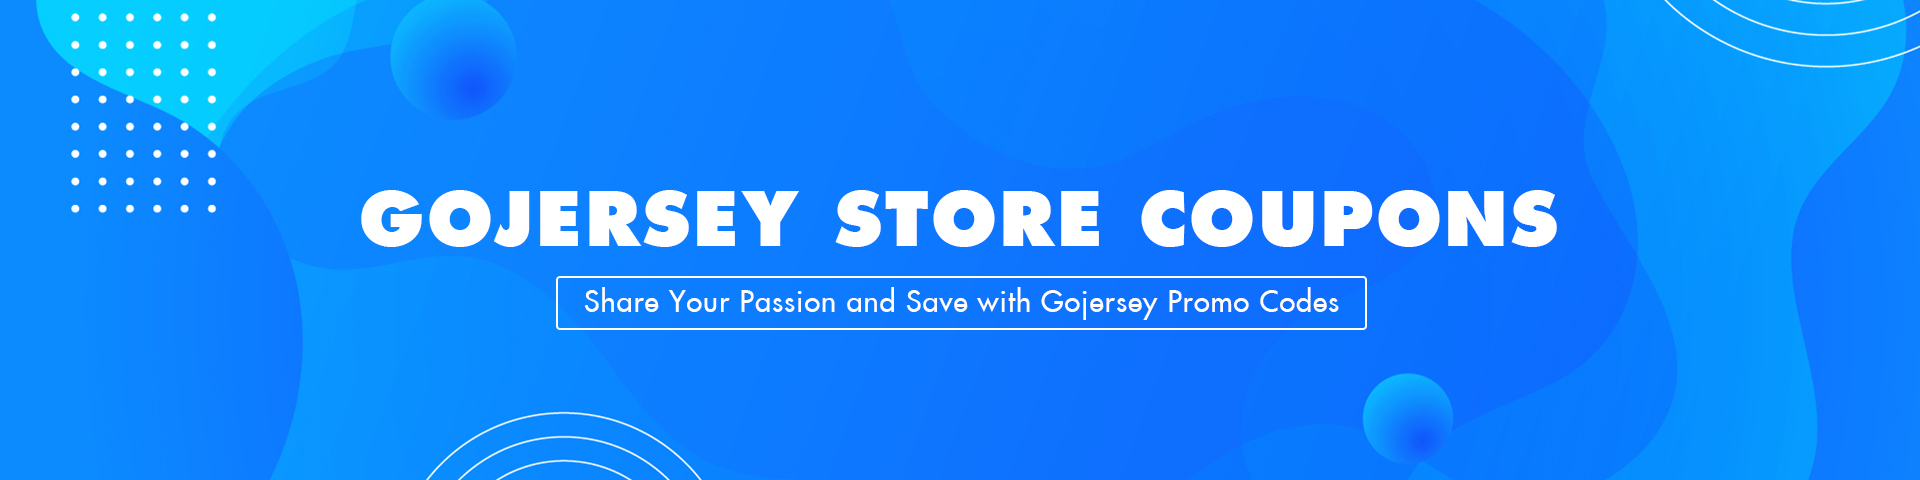 CouponCenter - gojersey